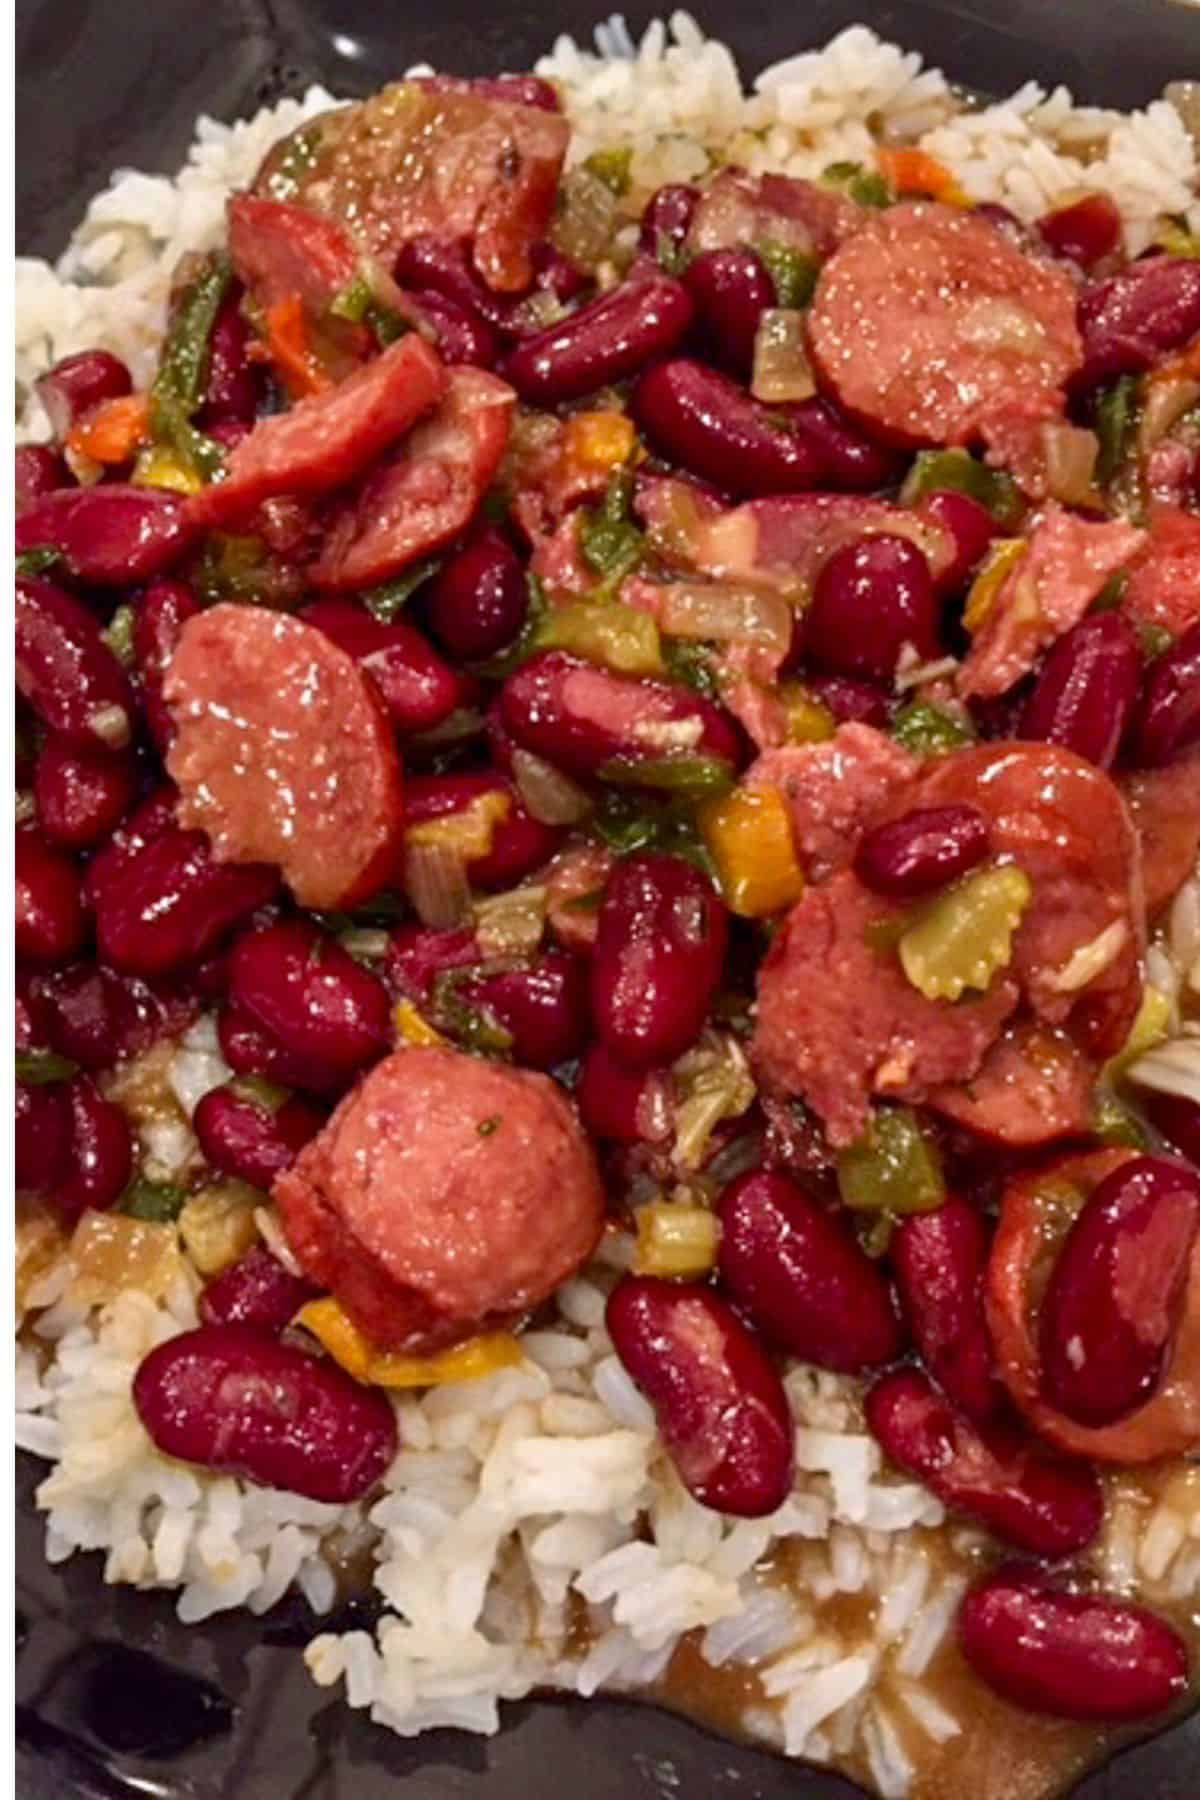 A plate of red beans with sausage and rice on a mound of white rice.